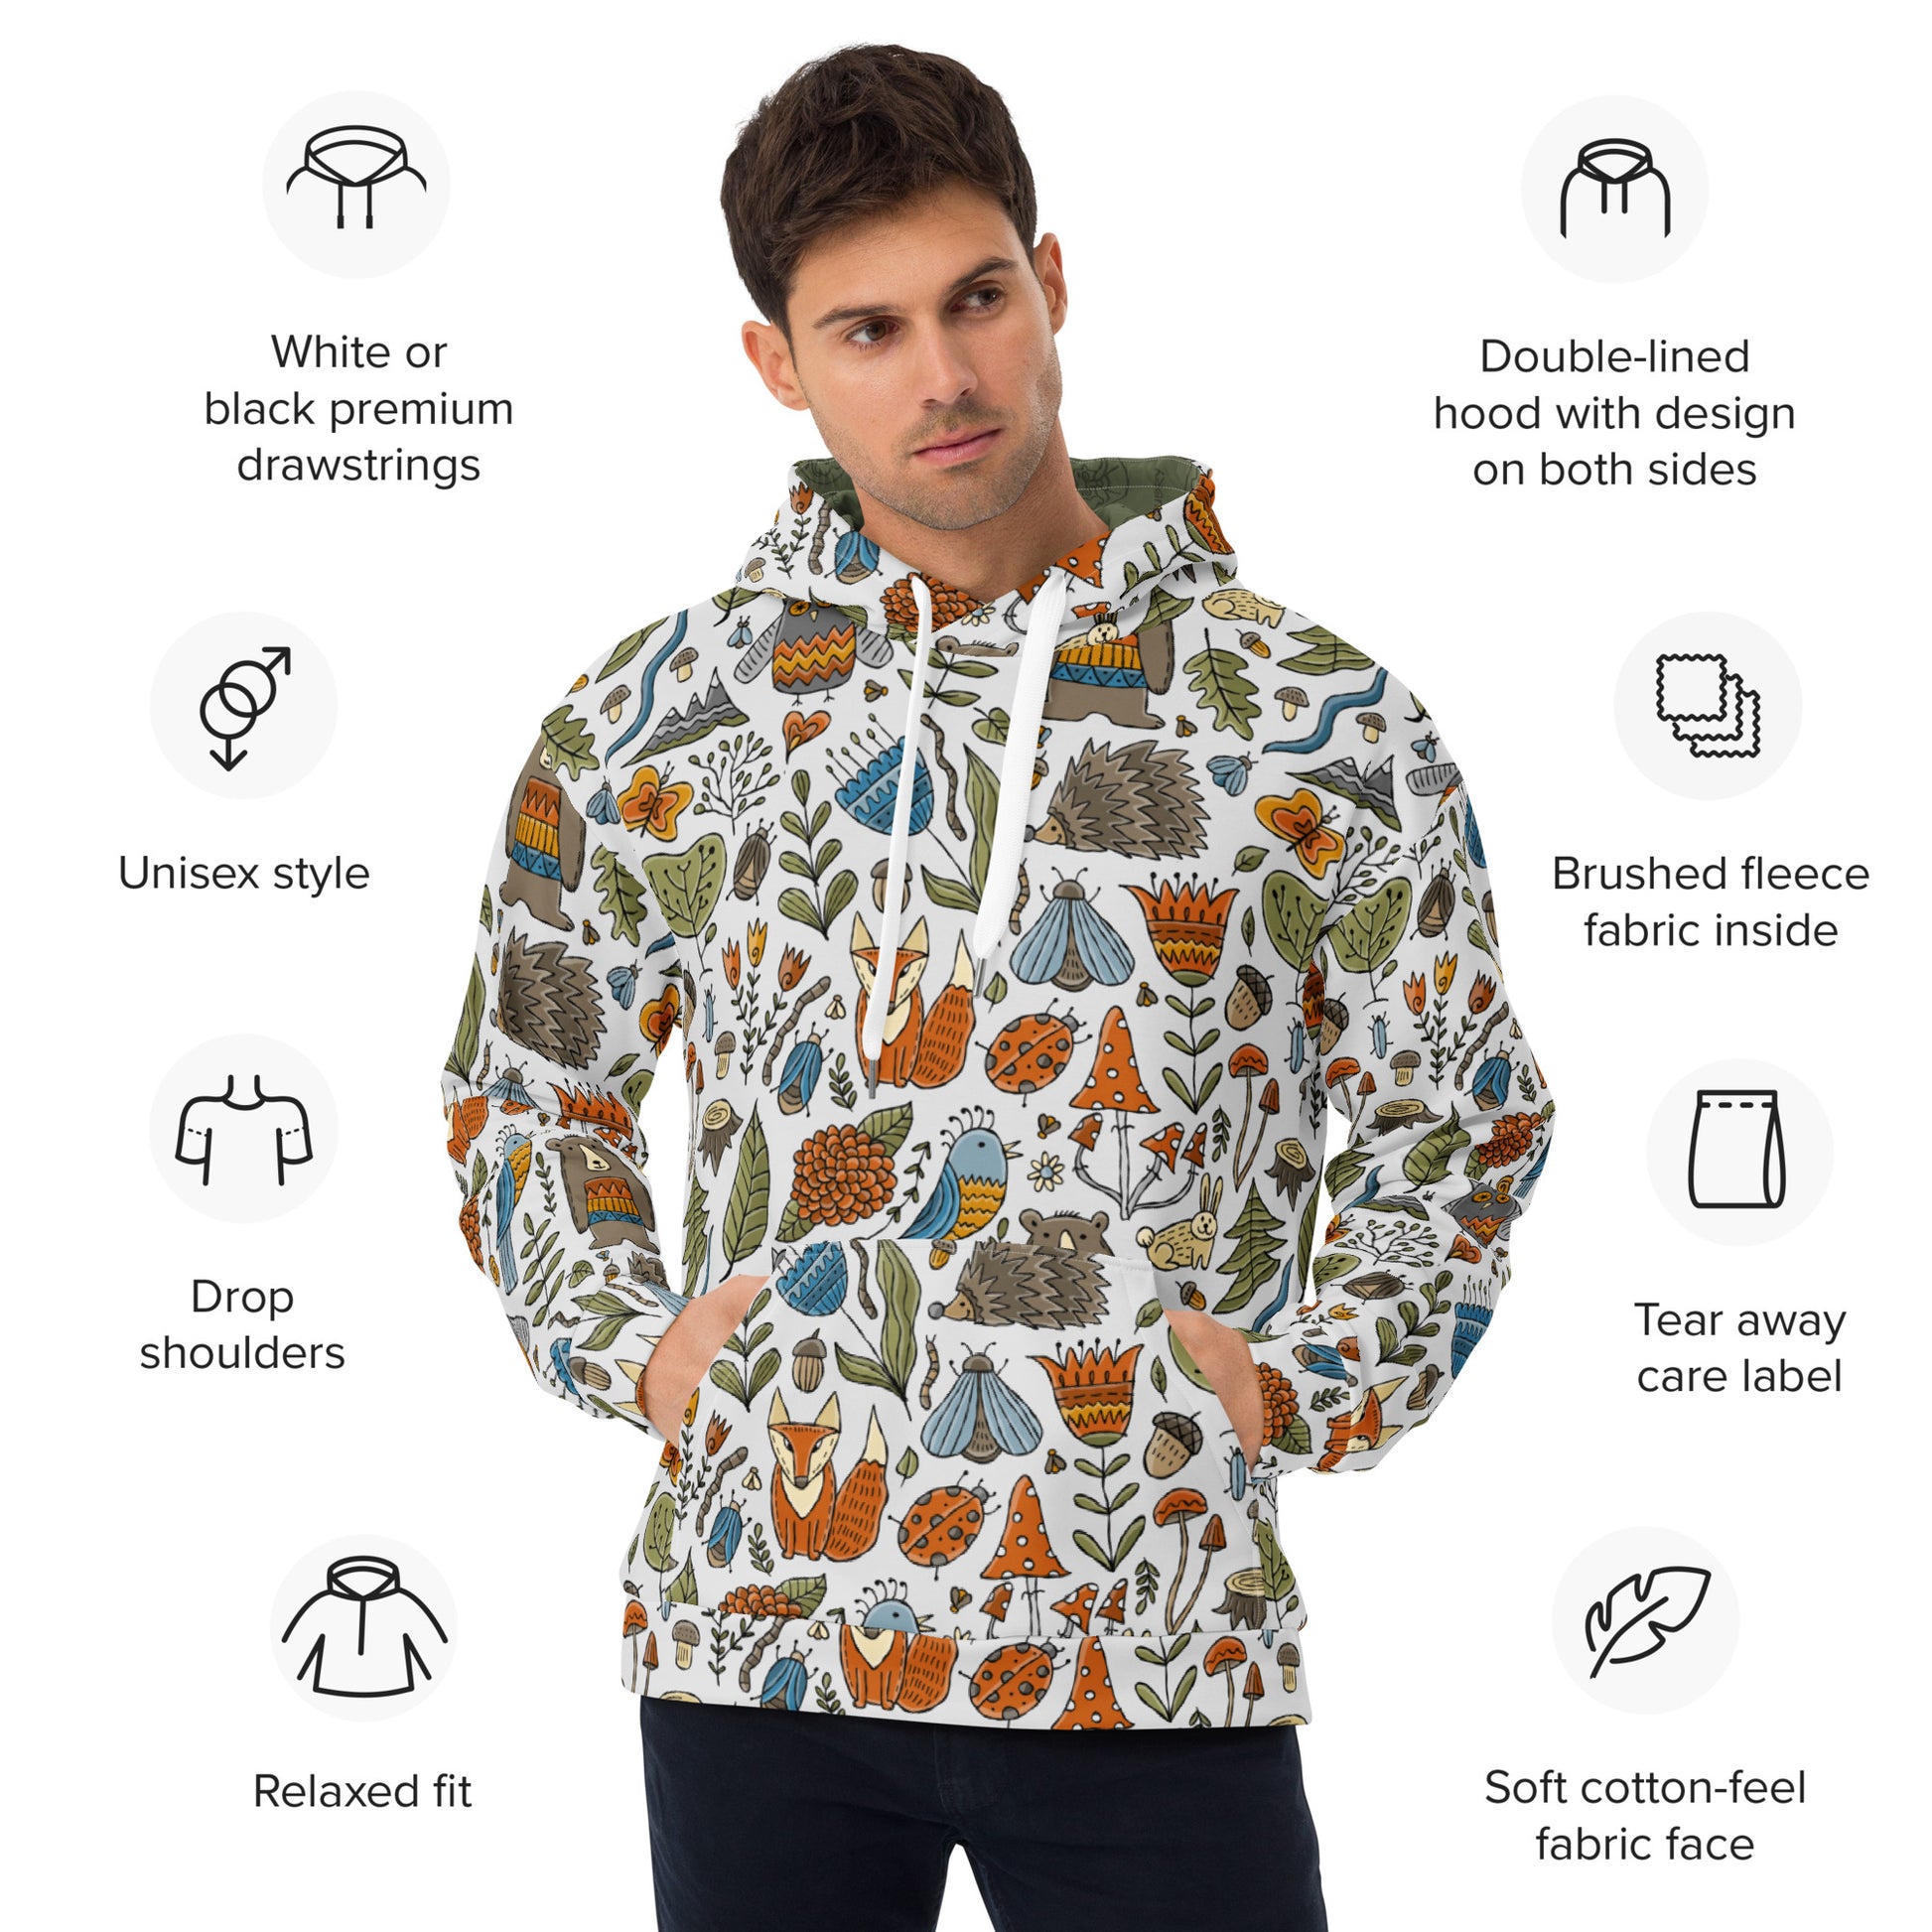 Man wear in Artistic Designer Hoodie all over print vintage style with magic world illustration of forest - animals and birds flowers and nature bear fox owls butterflies hedgehog insects mashrooms and trees. Festival comfortable stylish wear trendy fashionable rare beautiful unique. Back side. Kudry